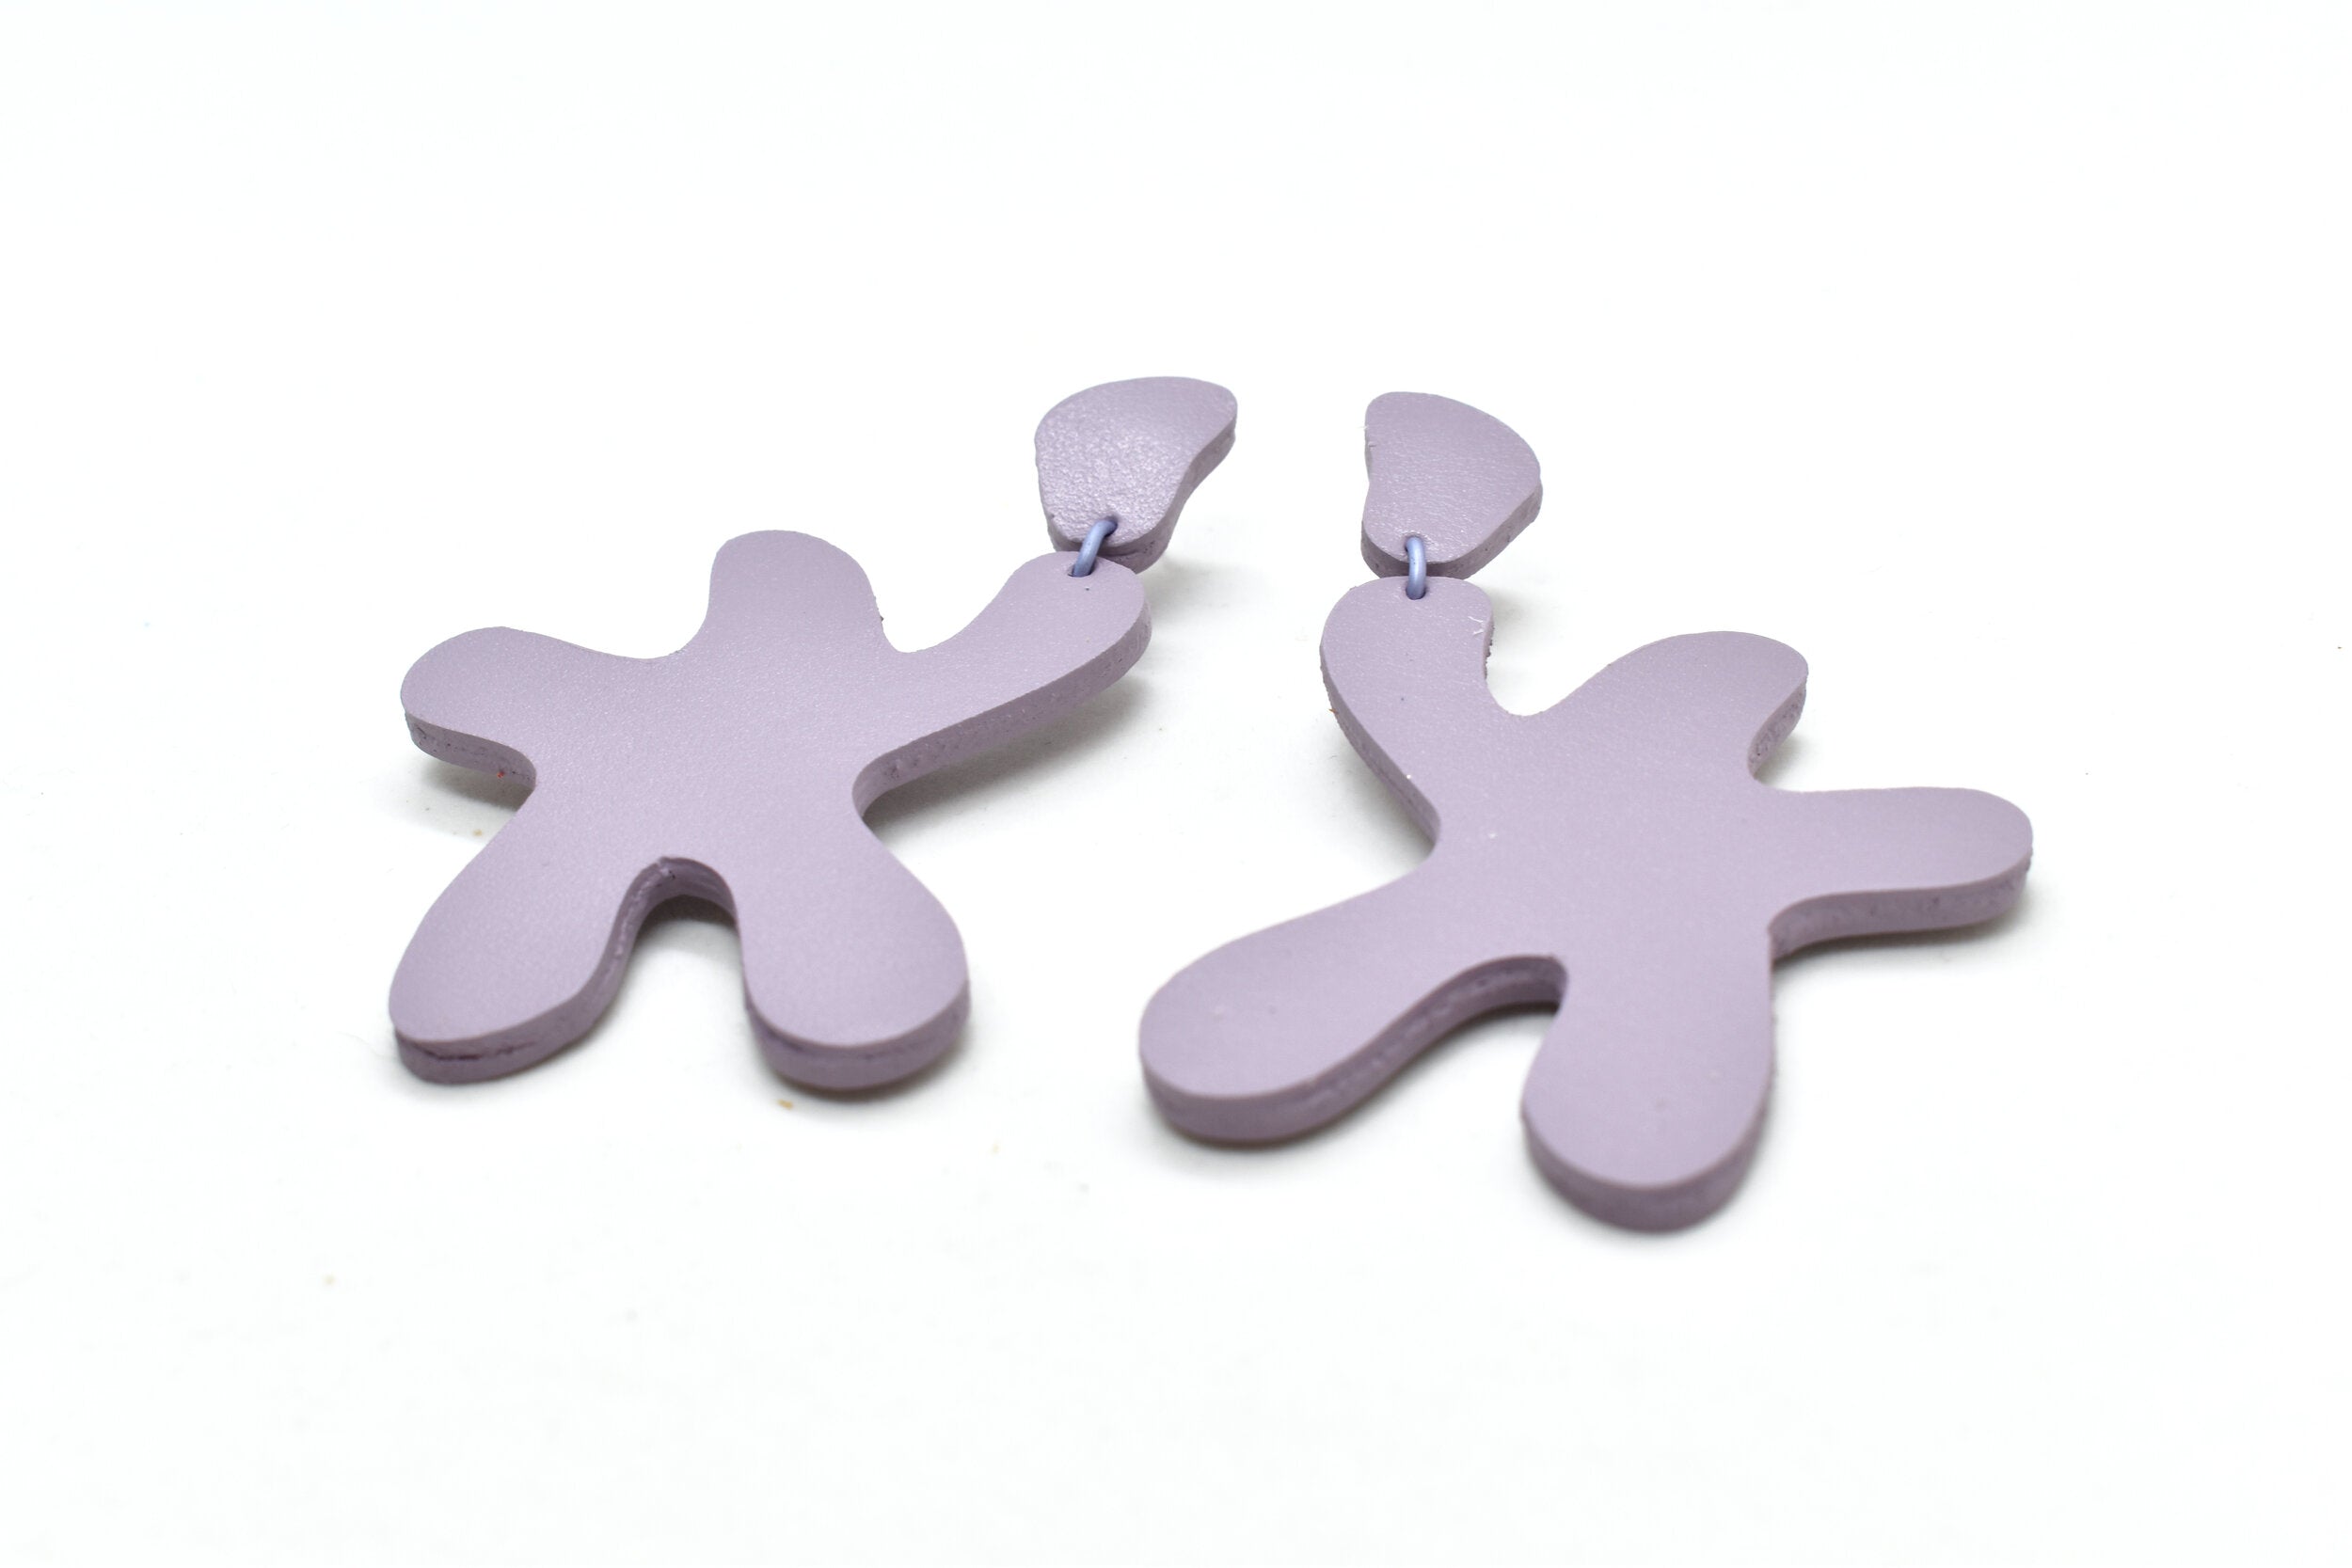 pastel purple leather earrings made of cutout organic shapes and anodized aluminum jump rings.